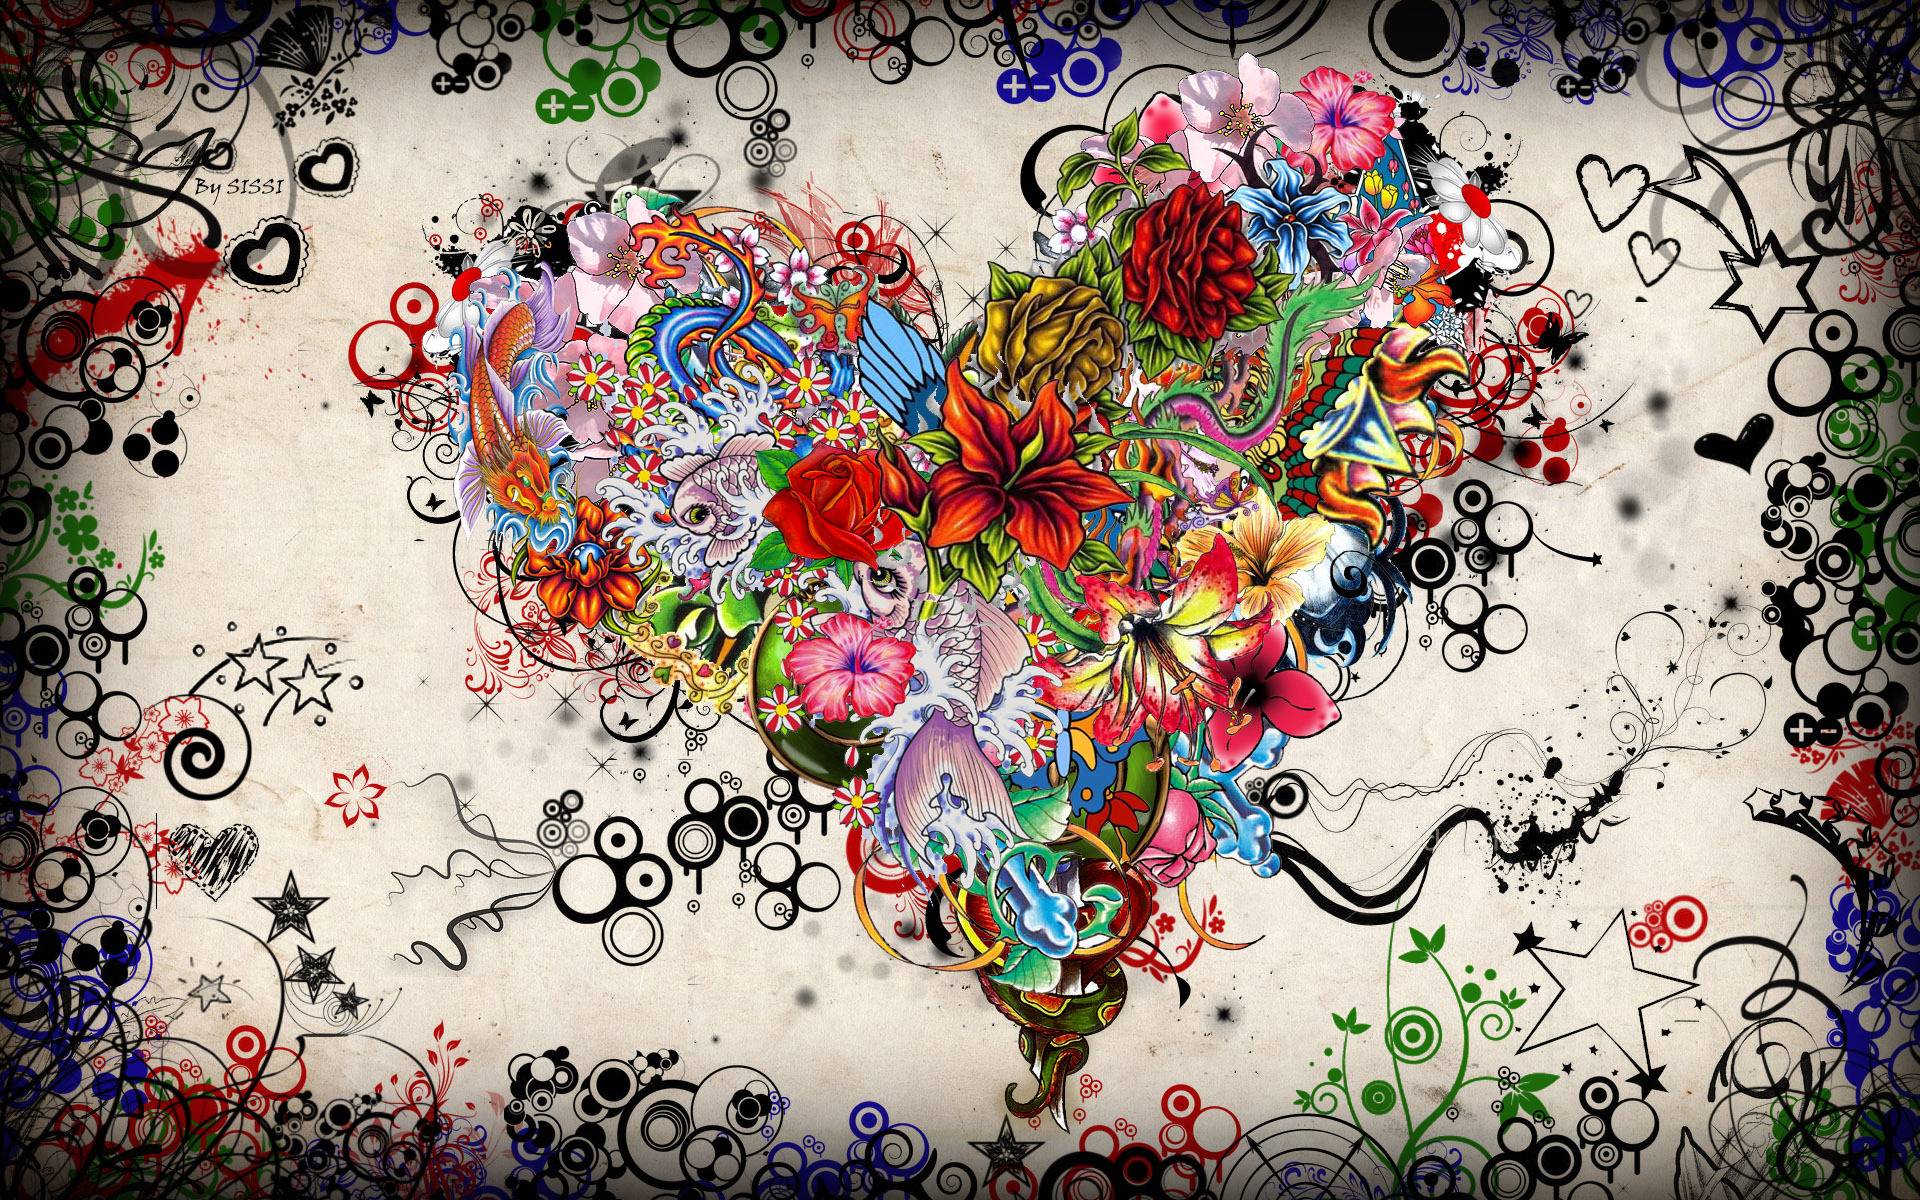 Flower heart wallpaper and image, picture, photo